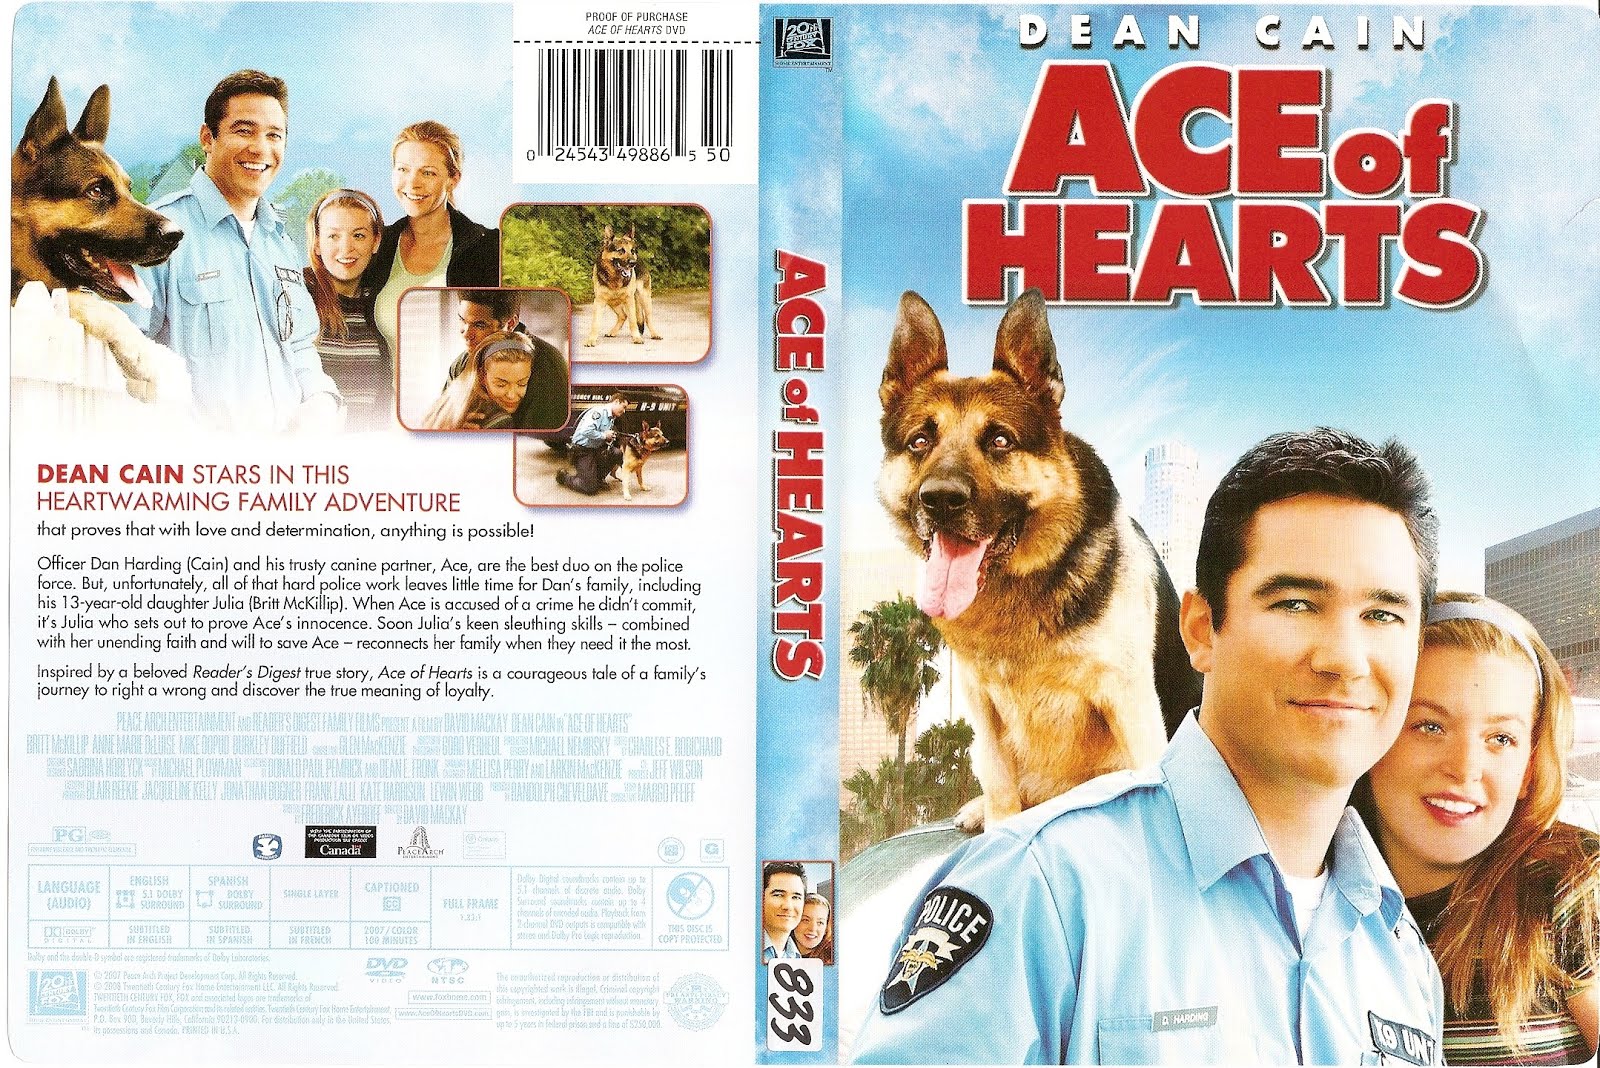 Ace of hearts 2008